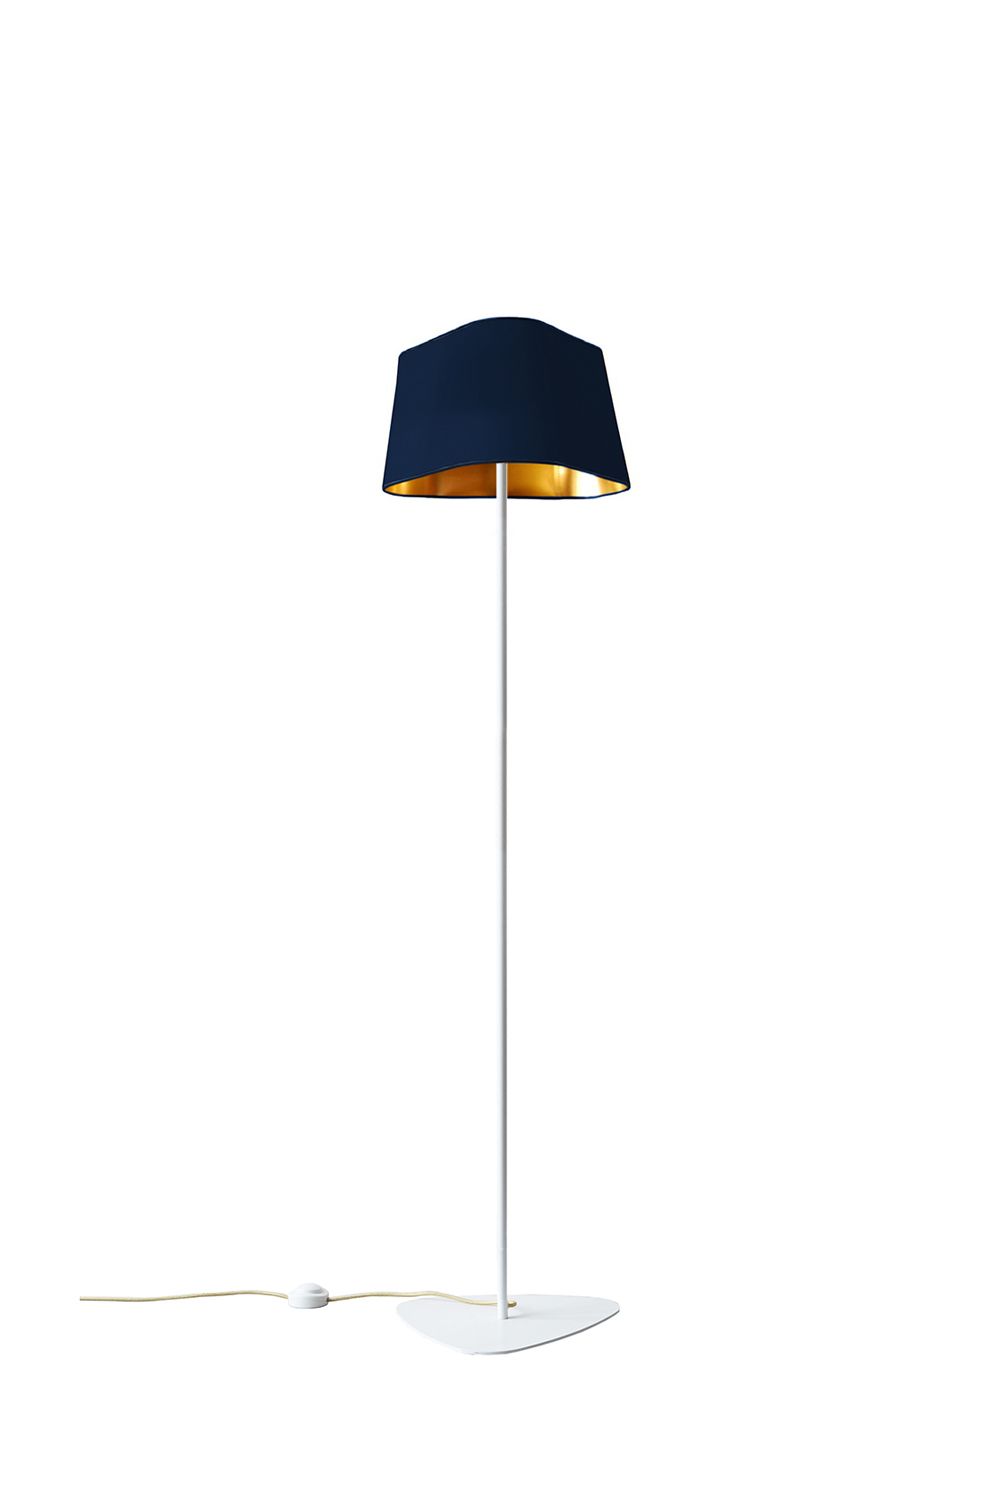 Floorlamp 162 Grand Nuage – Navy Blue And Gold – Designheure Inside Blue Floor Lamps (View 3 of 15)